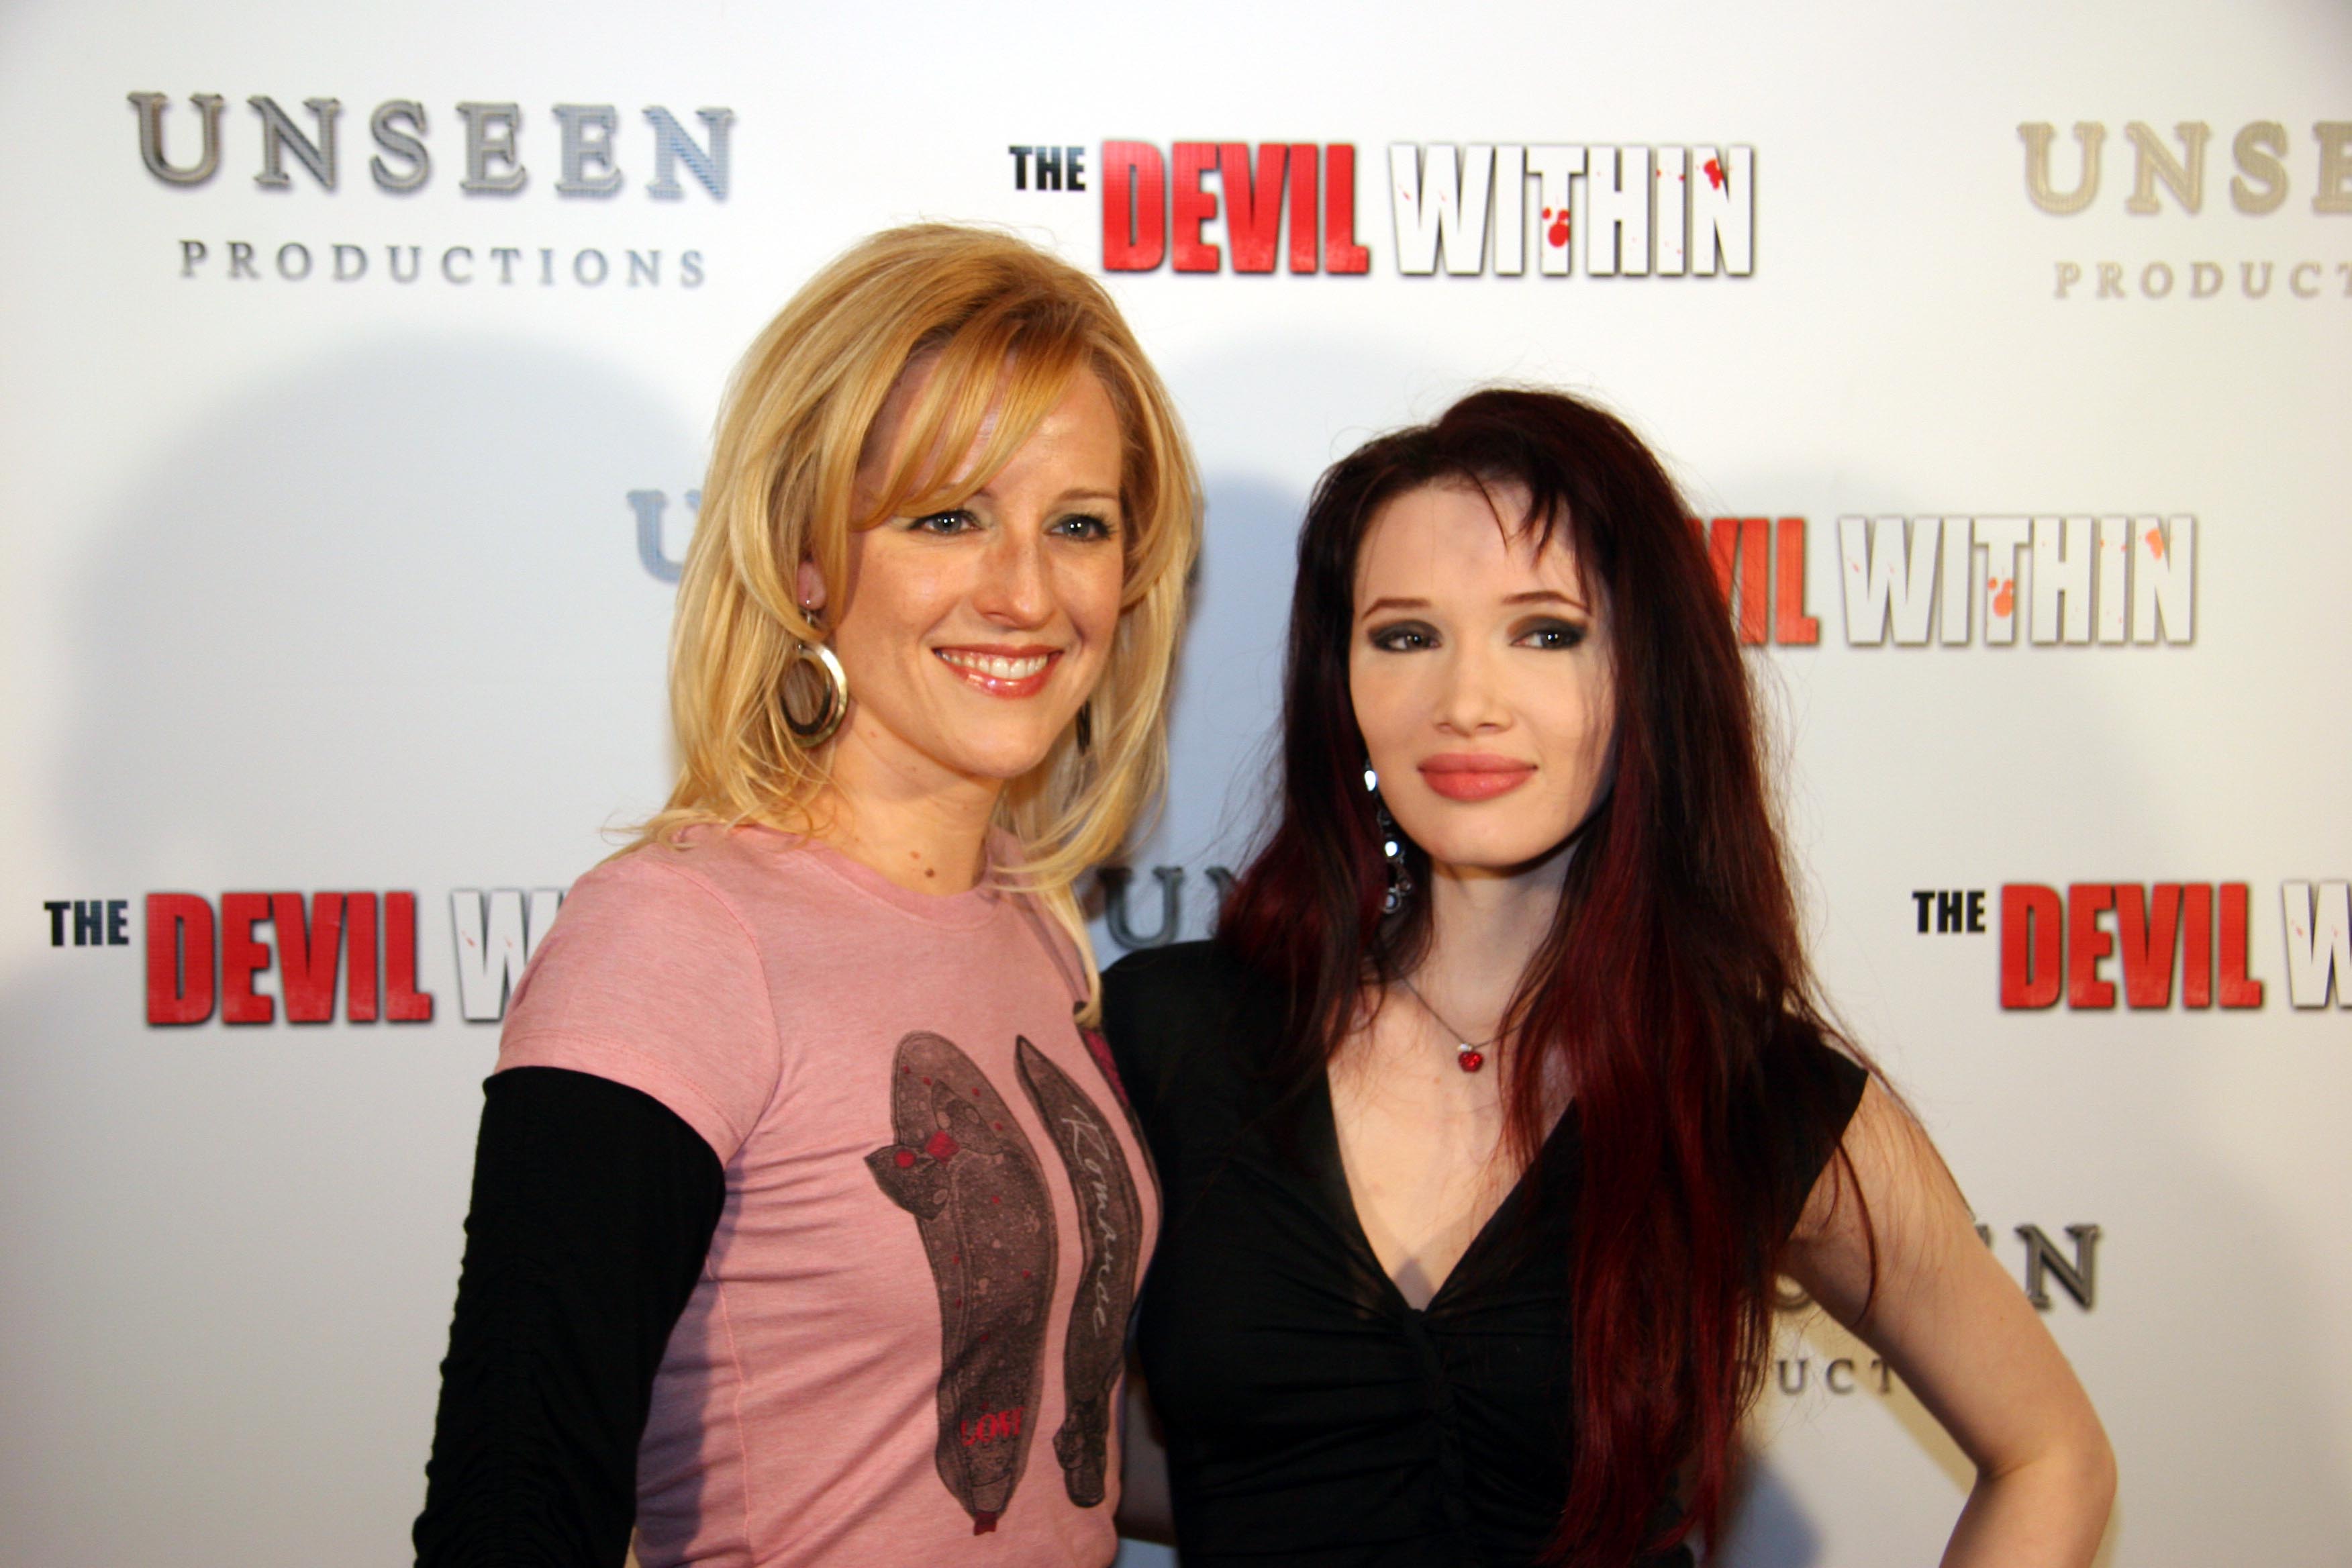 Producer/director Jenine Mayring (ZOMBIE BOYFRIEND music video) and singer Emii on the red carpet at Unseen Productions' premiere of THE DEVIL WITHIN.